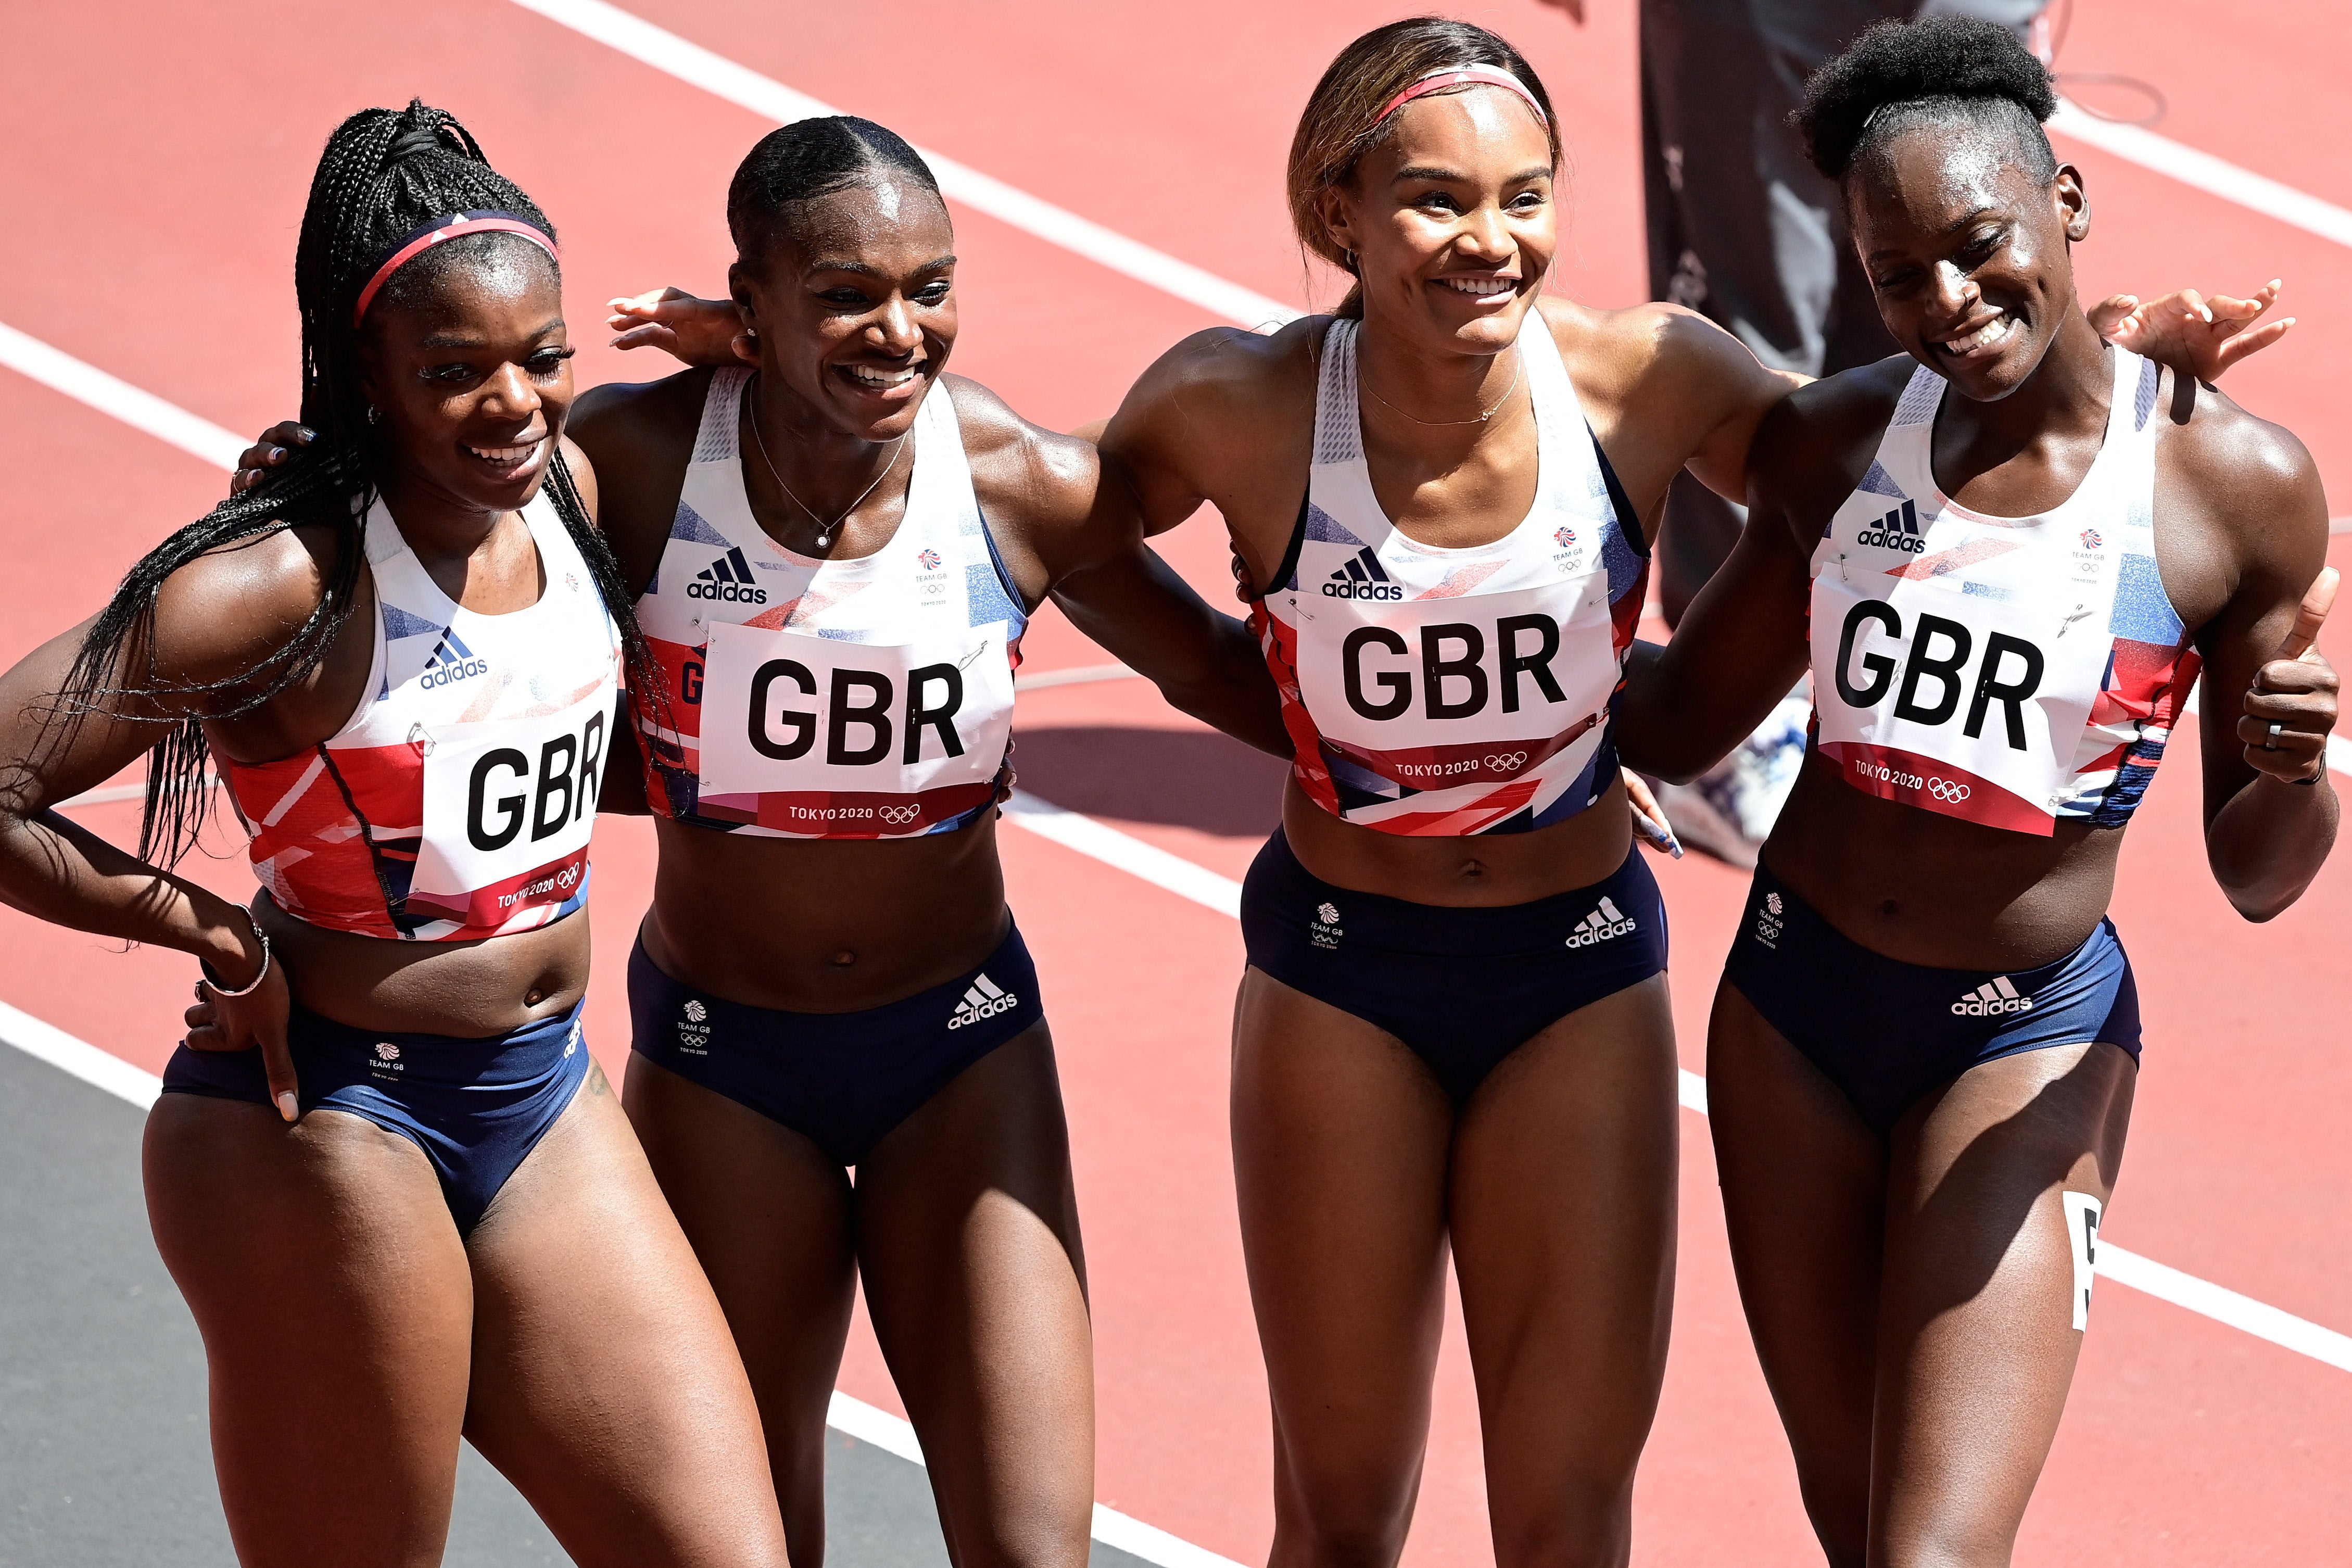 Britain's Asha Philip, Britain's Dina Asher-Smith, Britain's Imani Lansiquot and Britain's Daryll Neita pose after winning in the women's 4x100m relay heats during the Tokyo 2020 Olympic Games at the Olympic Stadium in Tokyo on August 5, 2021.